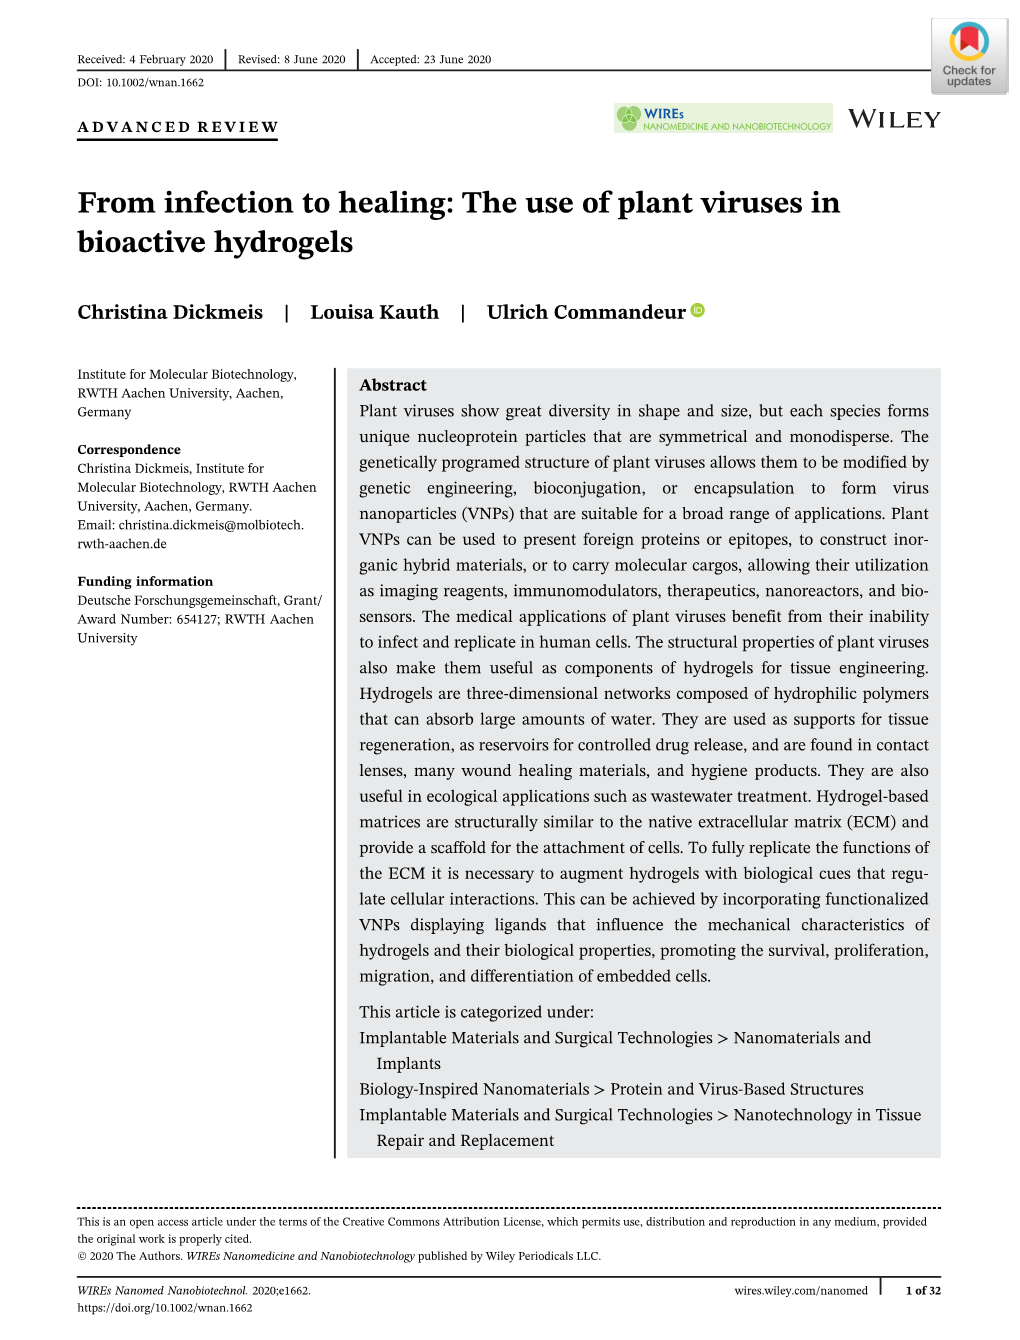 From Infection to Healing: the Use of Plant Viruses in Bioactive Hydrogels